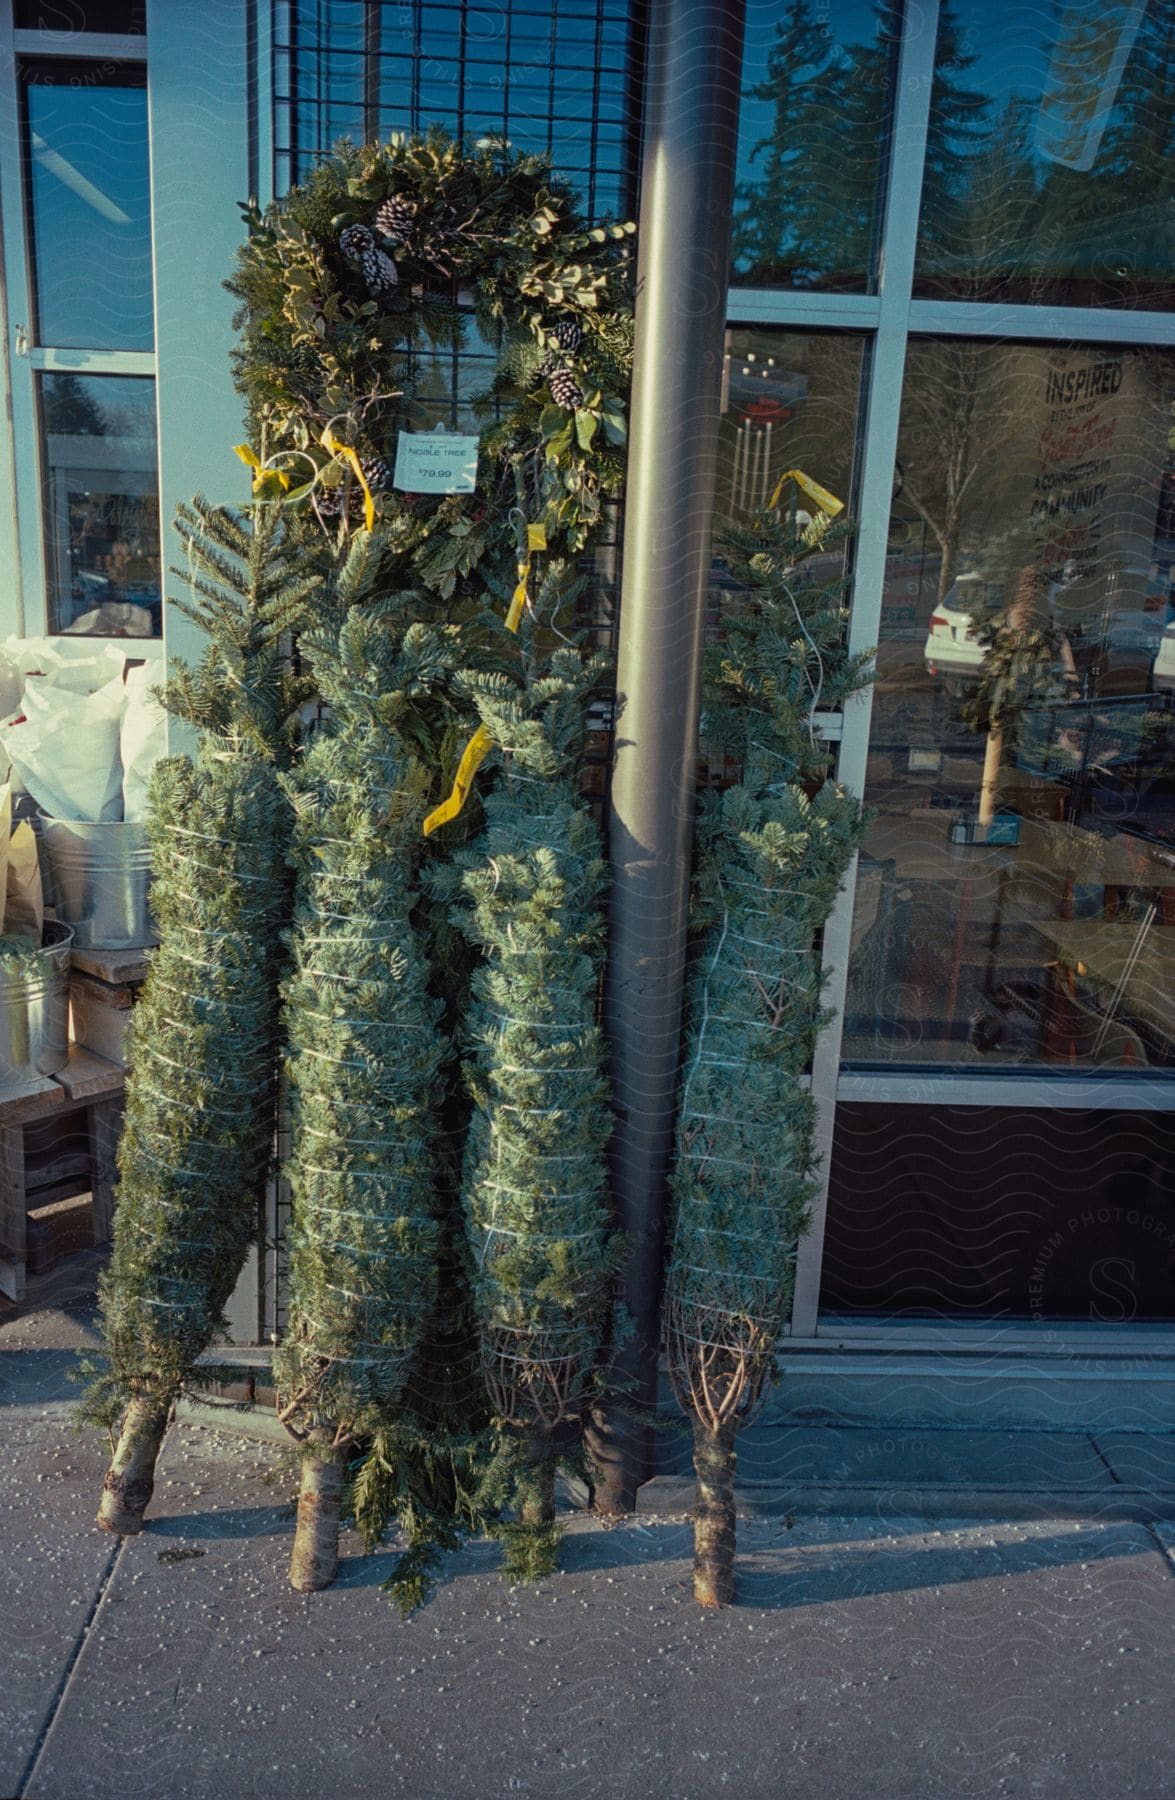 Christmas trees and a wreath for sale outside a store